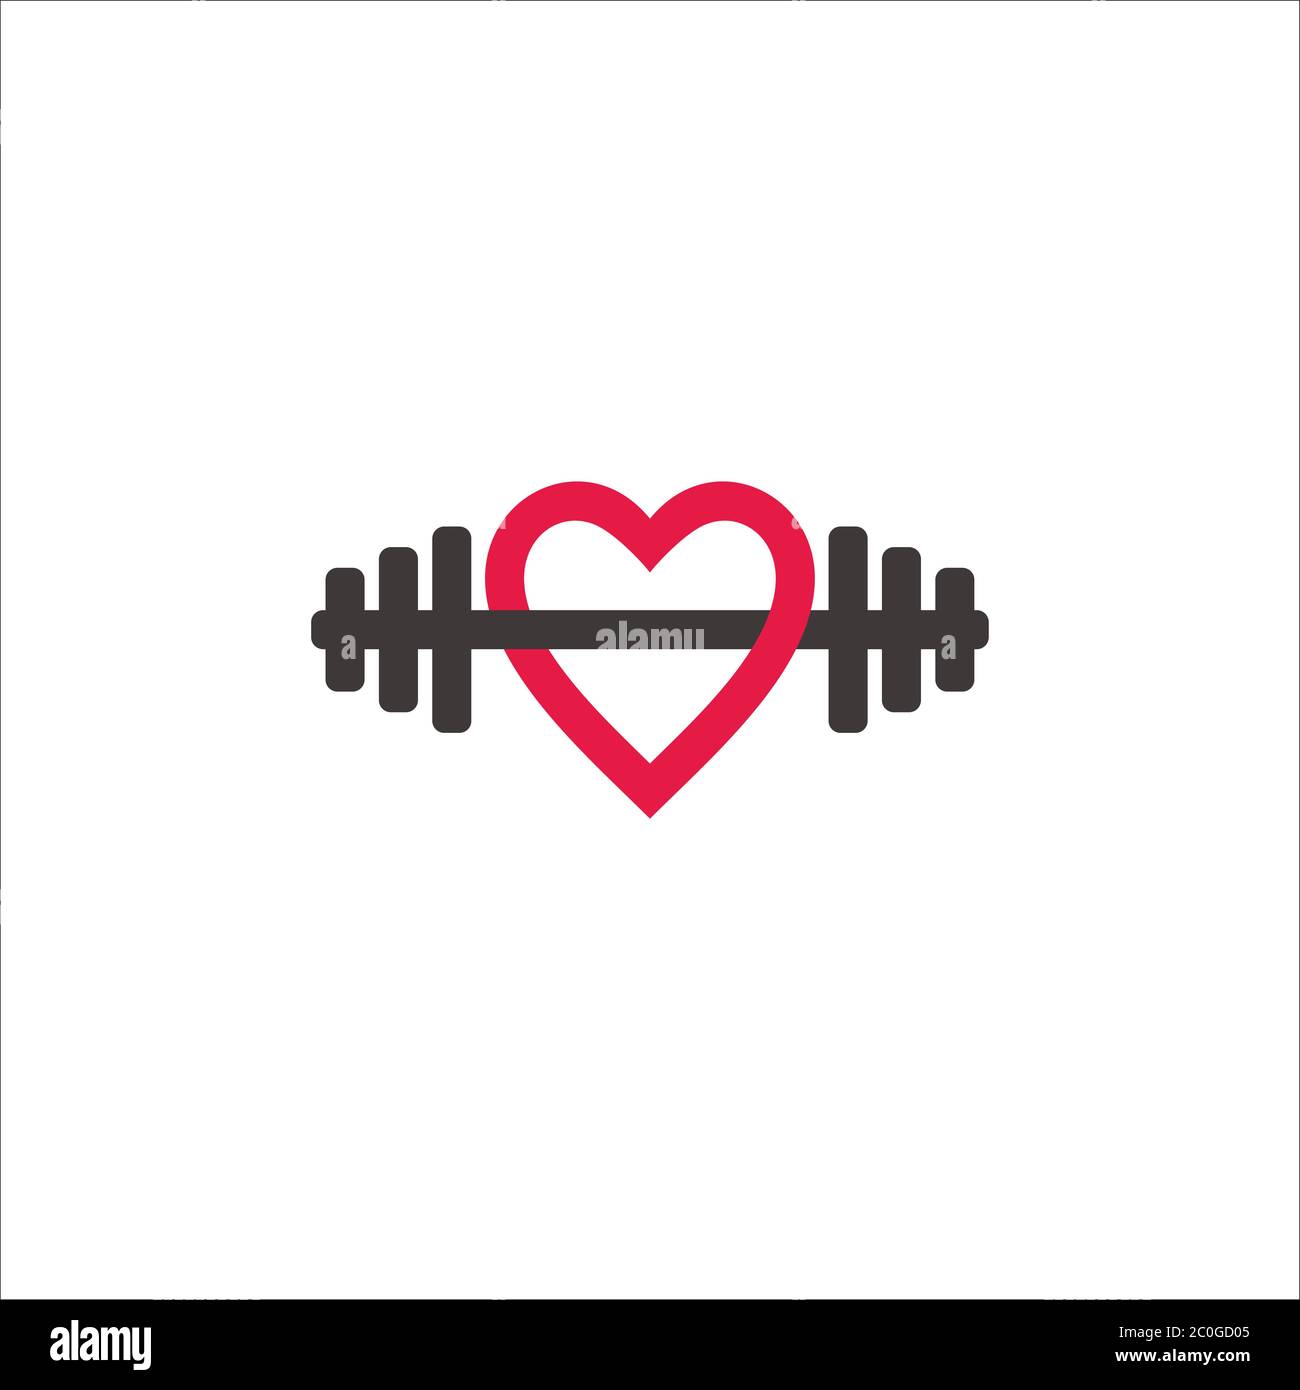 Pin on Health & Fitness that I love